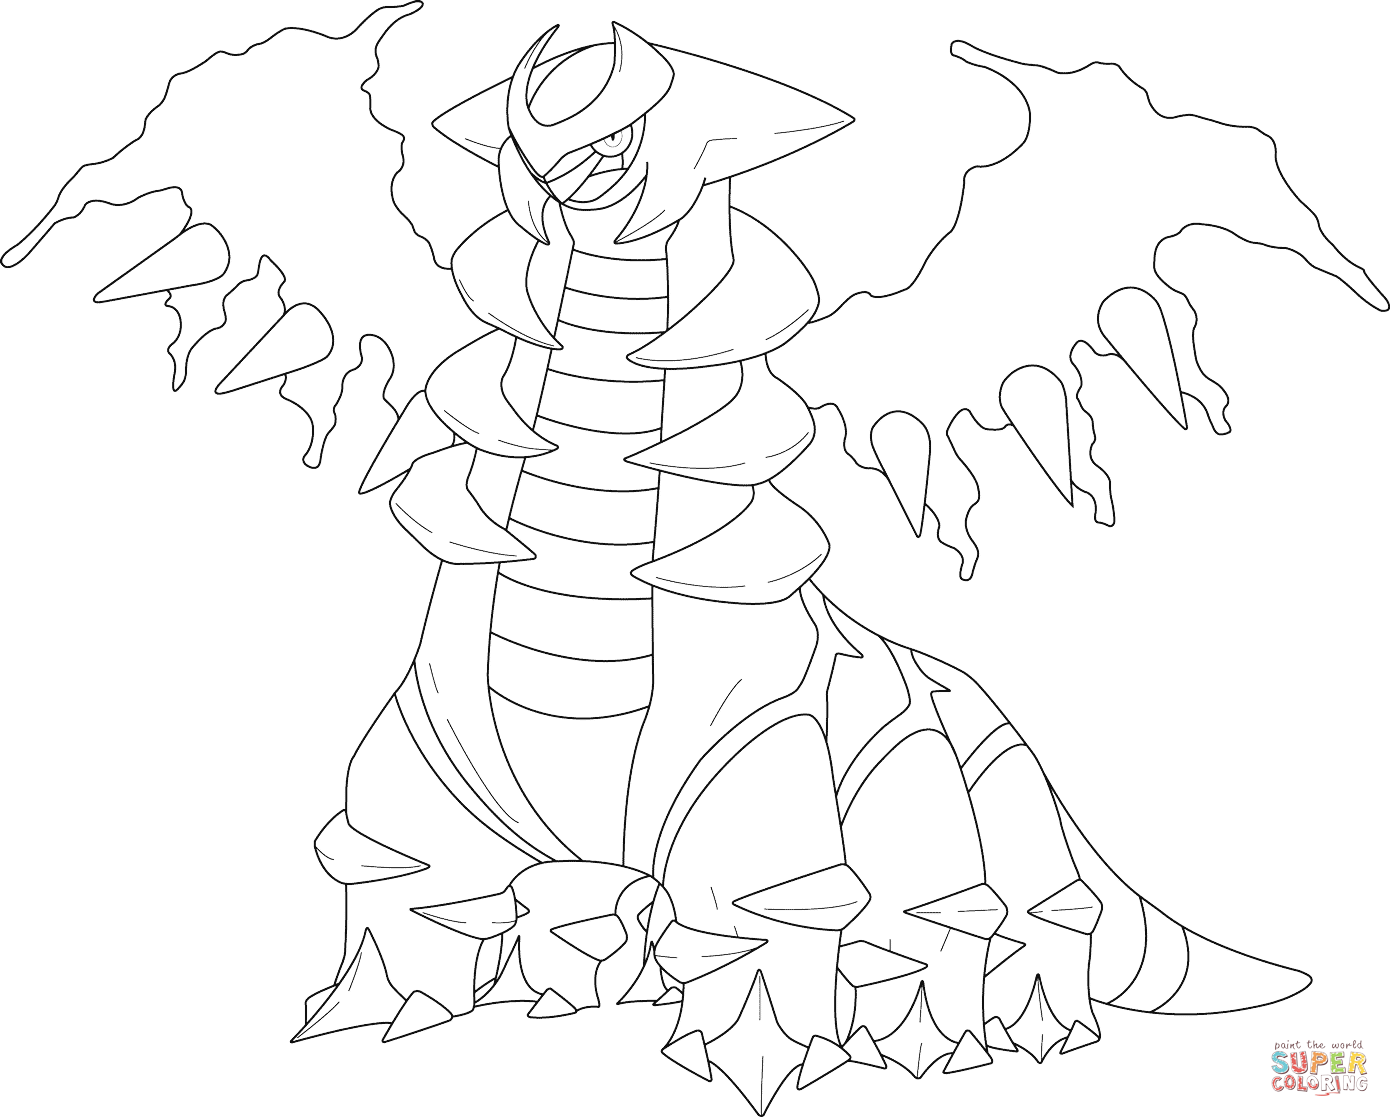 Giratina in Altered Form coloring page